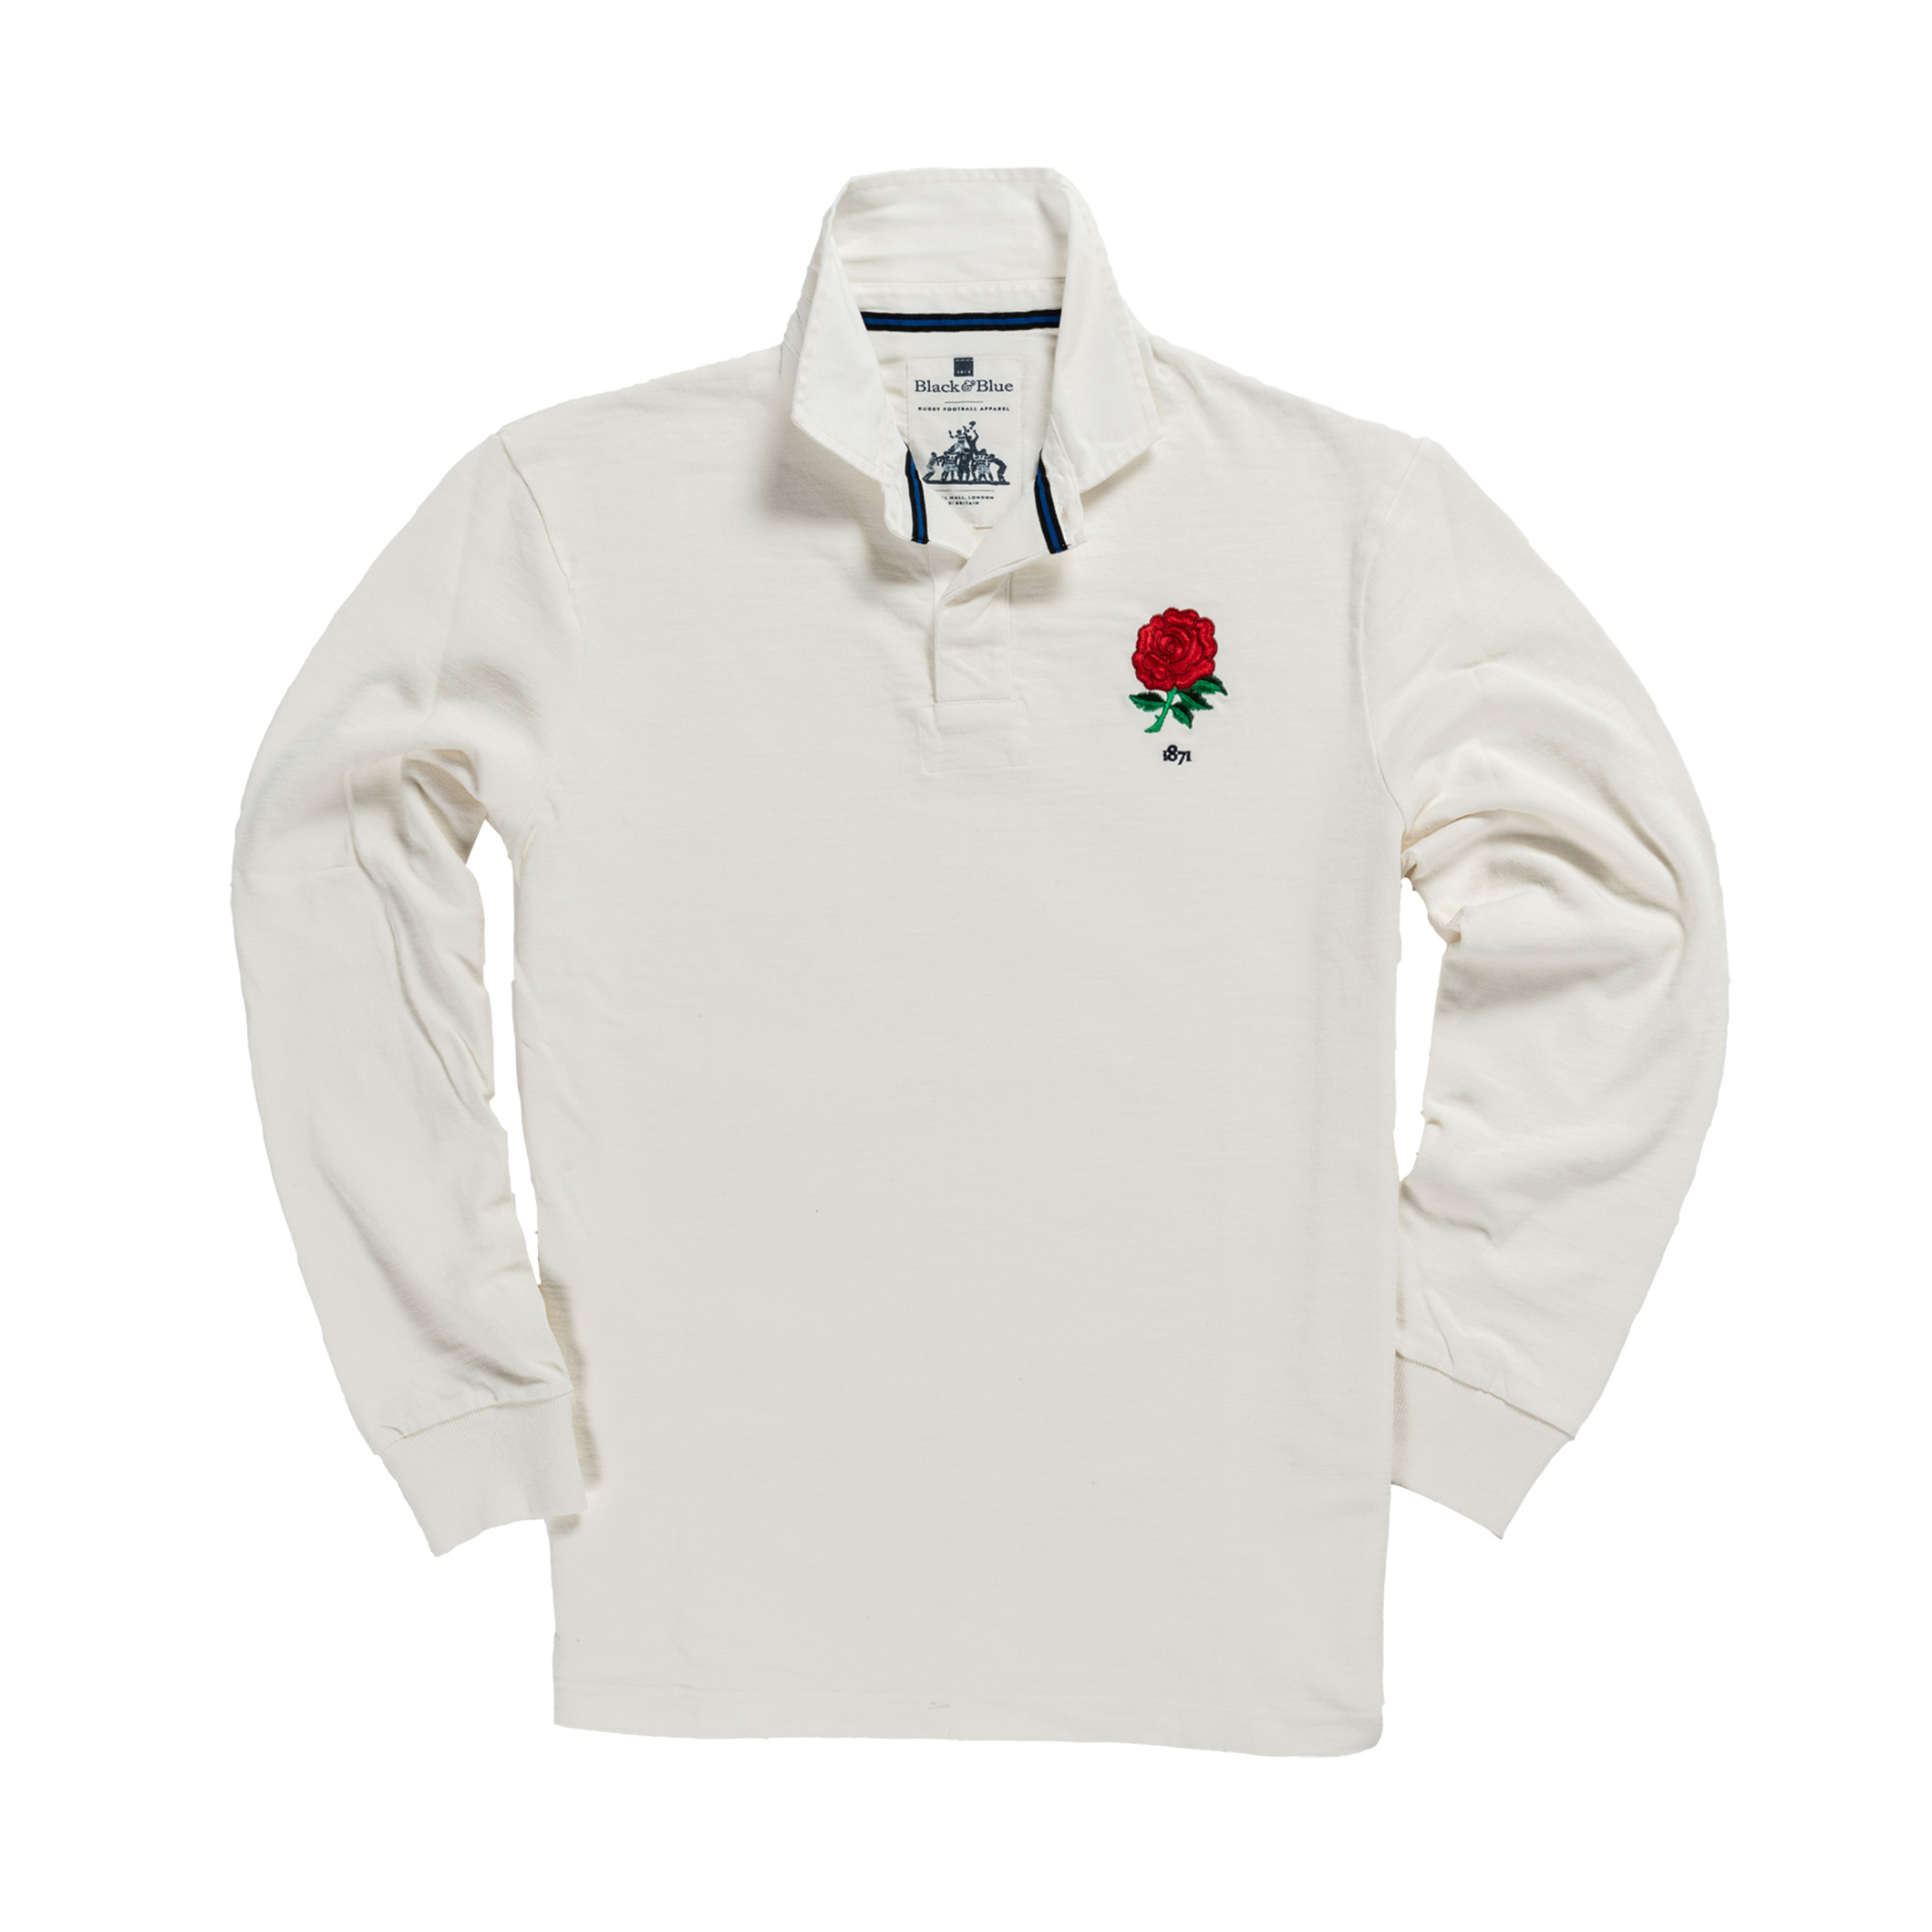 vintage england rugby jersey